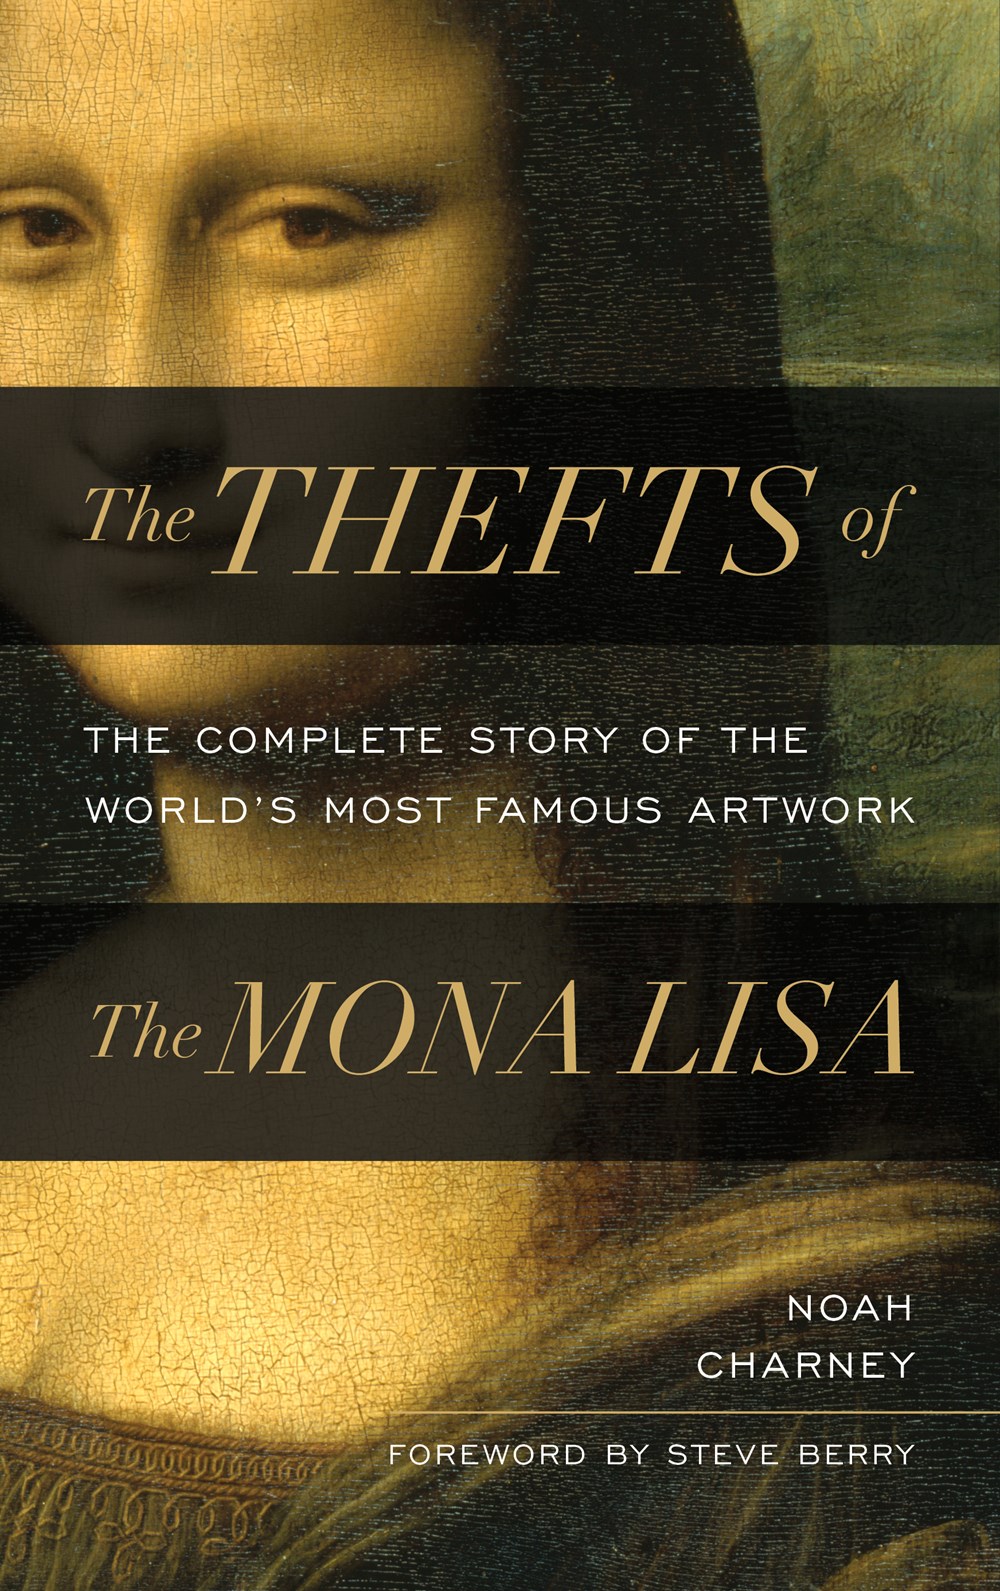 The Thefts of the Mona Lisa: The Complete Story of the World’s Most Famous Artwork